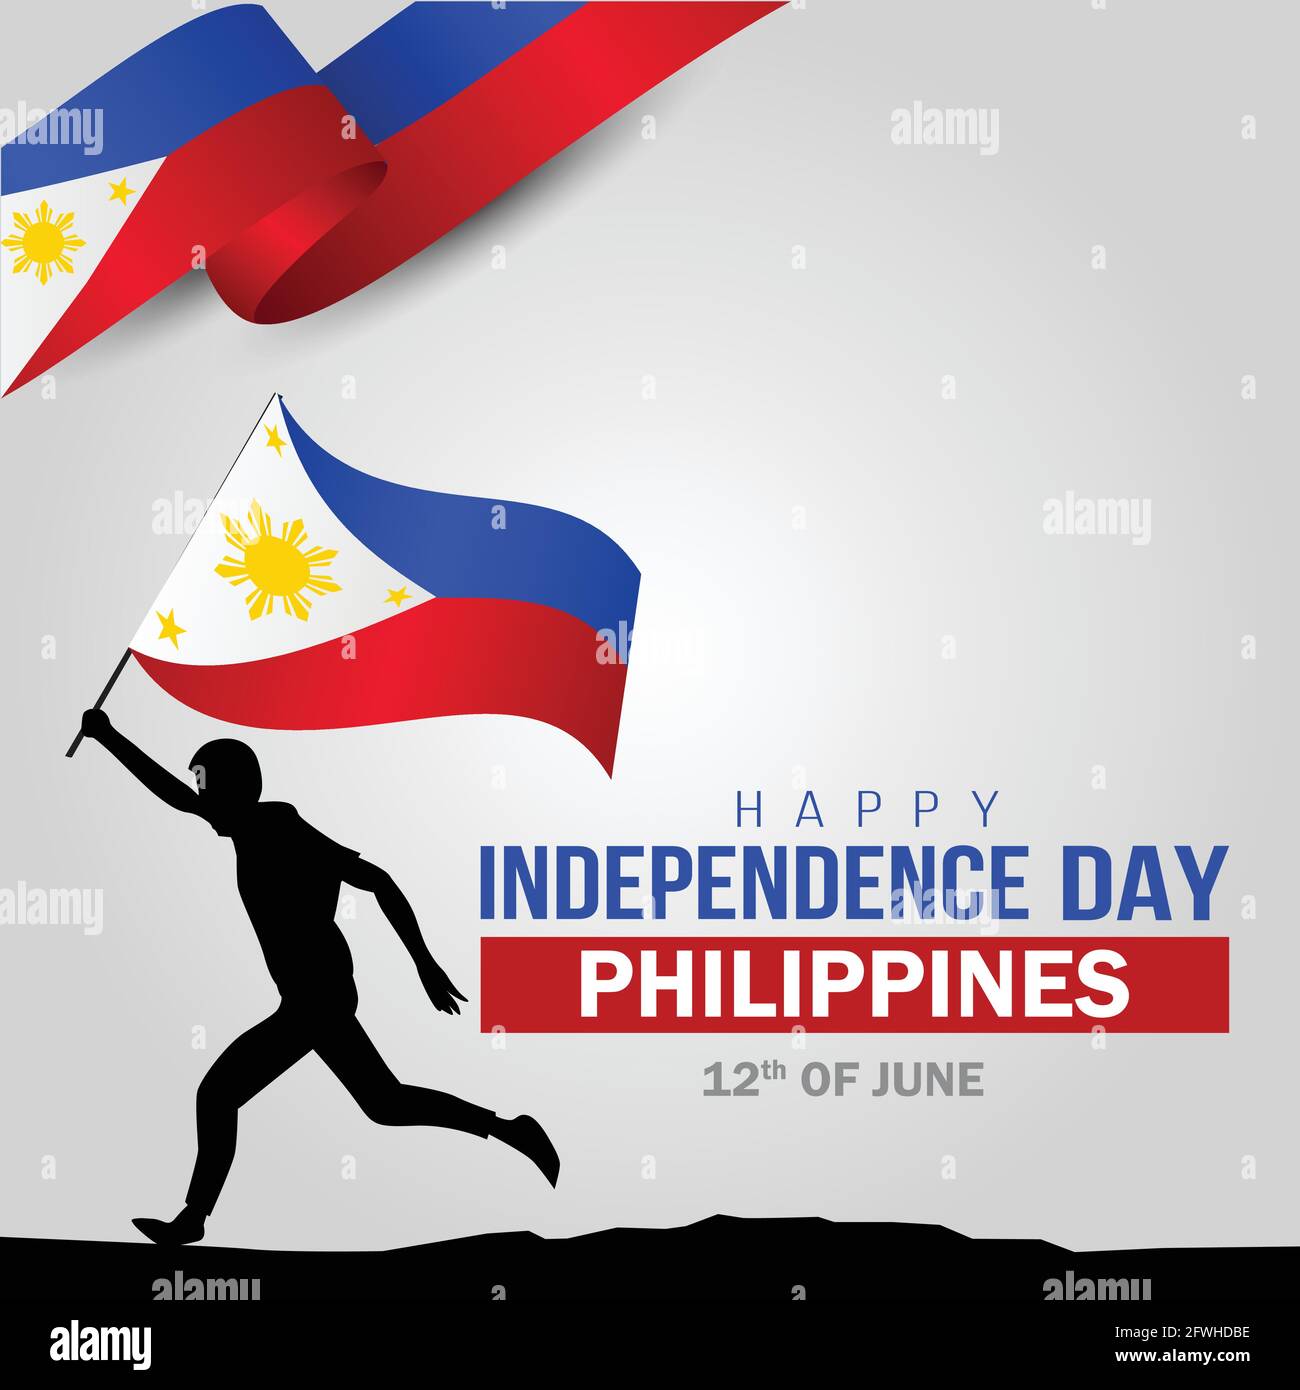 Happy Independence Day Philippines Hands Holding With Philippine Flag Vector Illustration Design 2FWHDBE 